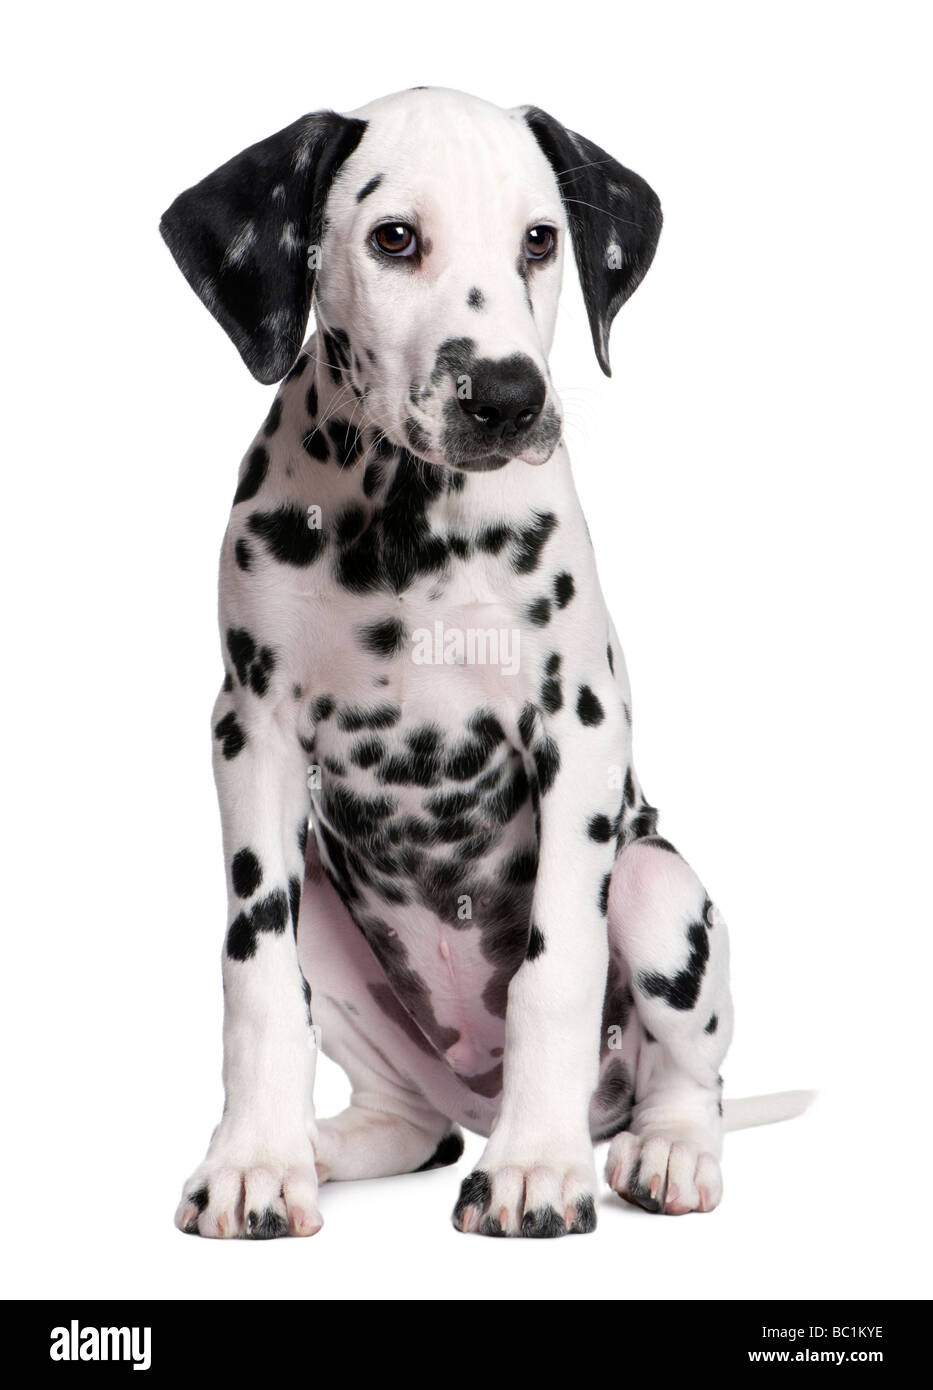 Dalmatian Spots High Resolution Stock Photography and Images - Alamy